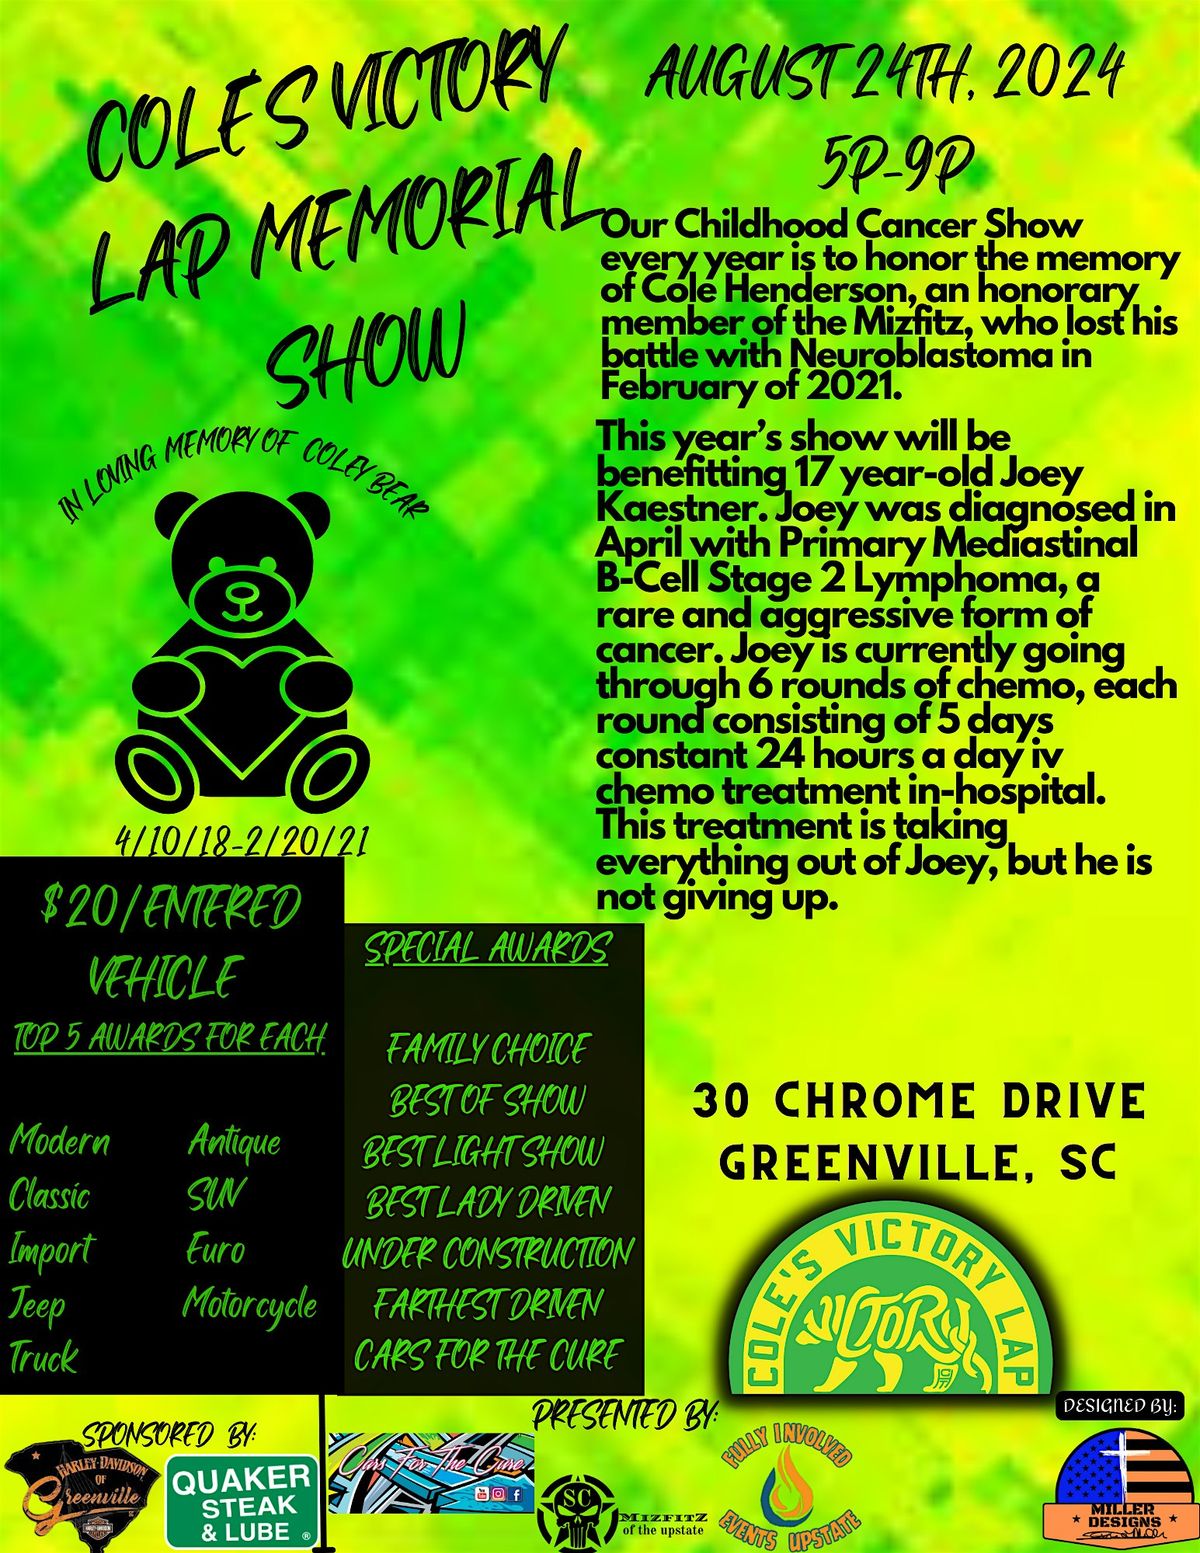 4th Annual Cole's Victory Lap Memorial Show